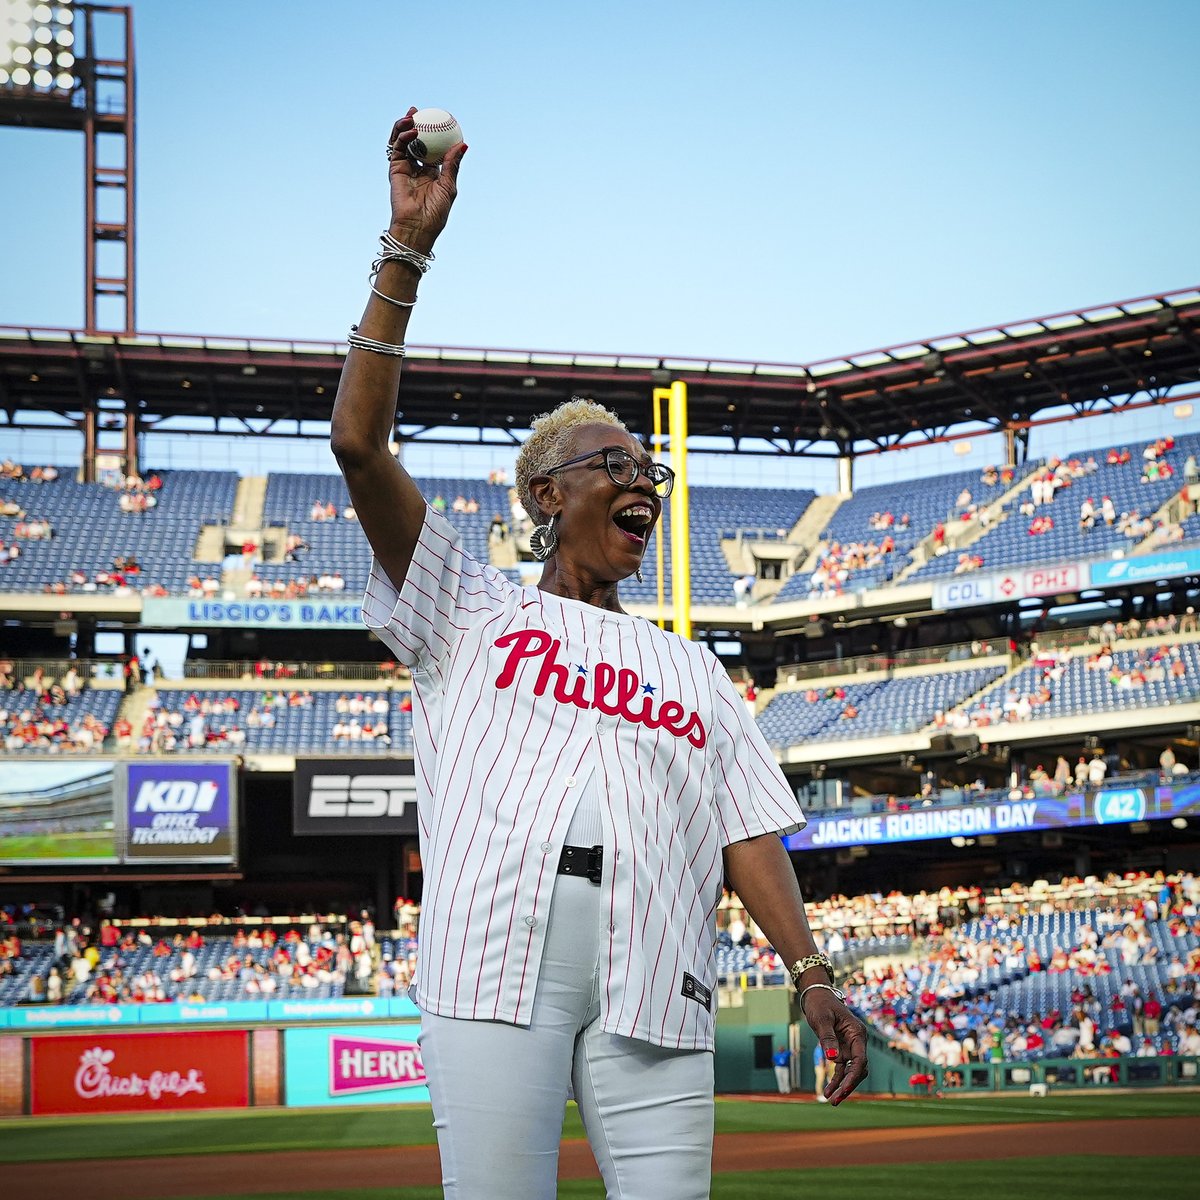 Tonight's first pitch was thrown out by Gail Quarles, daughter of pioneer Hank Mason, the first Black pitcher to pitch in the major leagues for the Phillies in 1958 ❤️